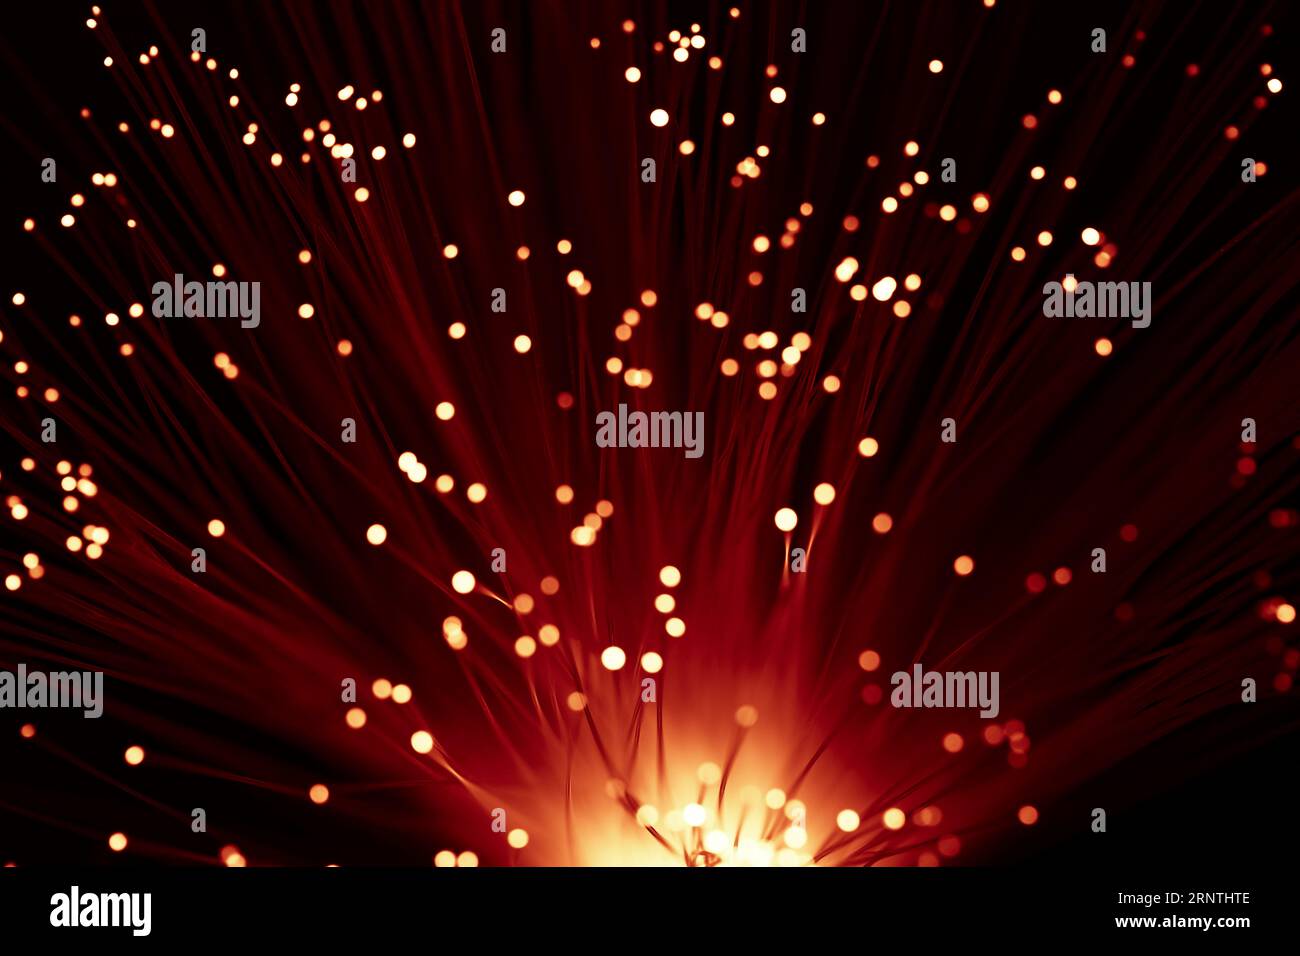 Abstract sunny red optic lights Stock Photo